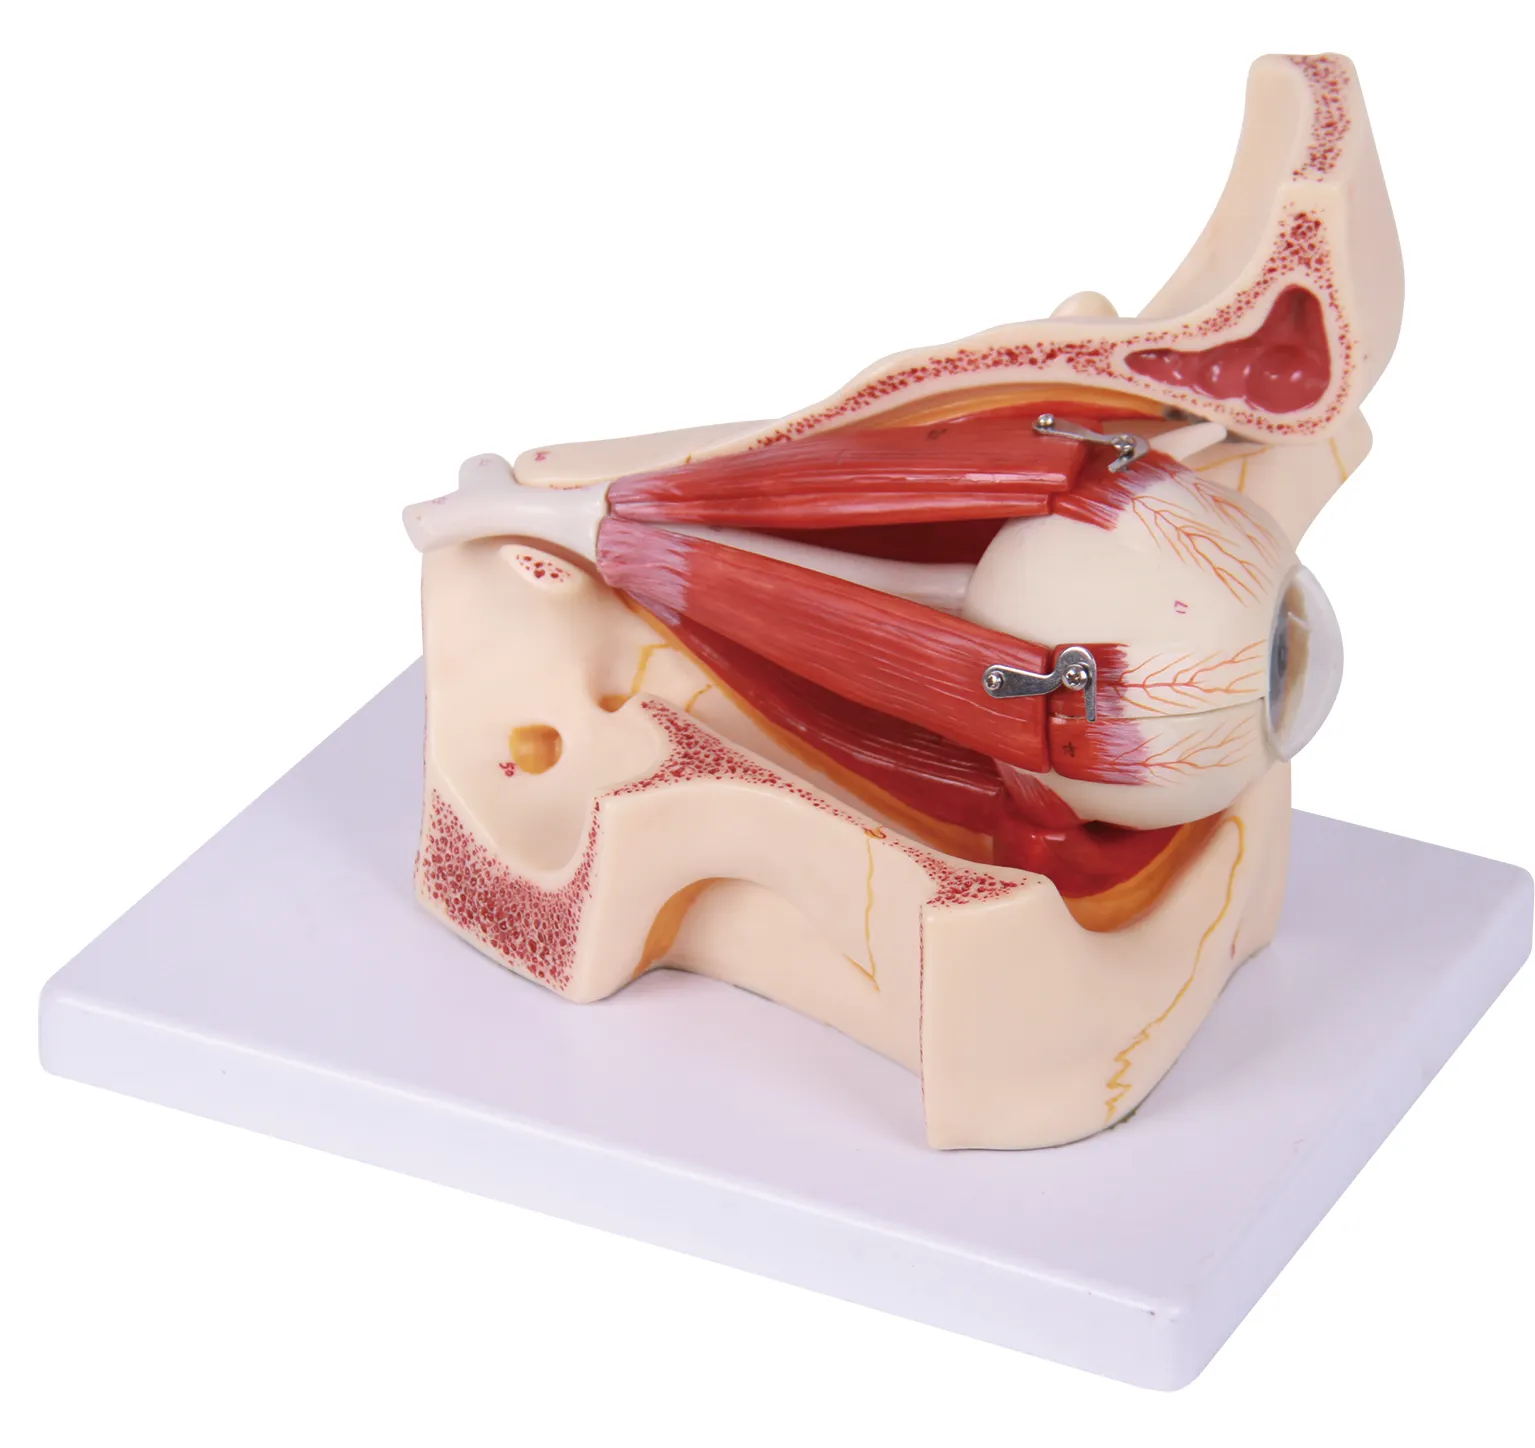 anatomy human anatomical eyes ears structure model